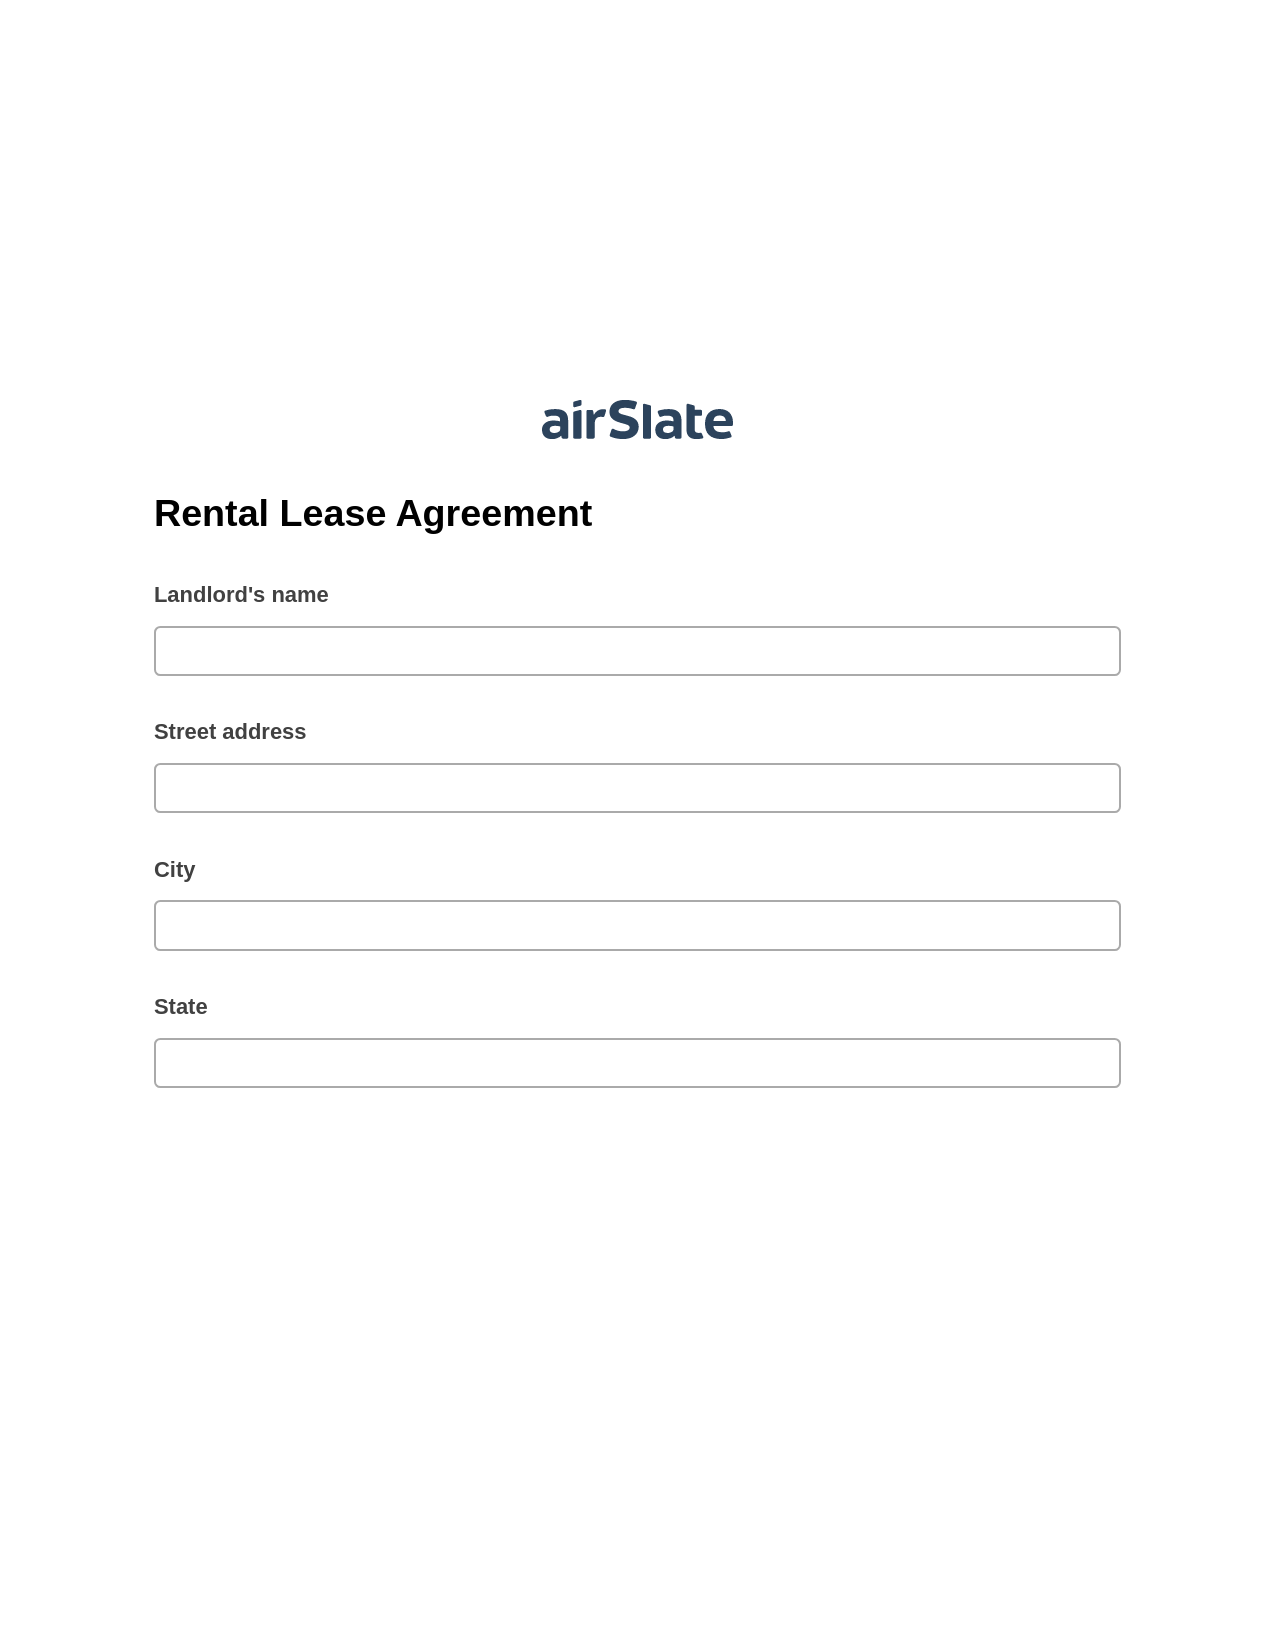 Rental Lease Agreement Pre-fill from CSV File Bot, Google Cloud Print Bot, Archive to SharePoint Folder Bot